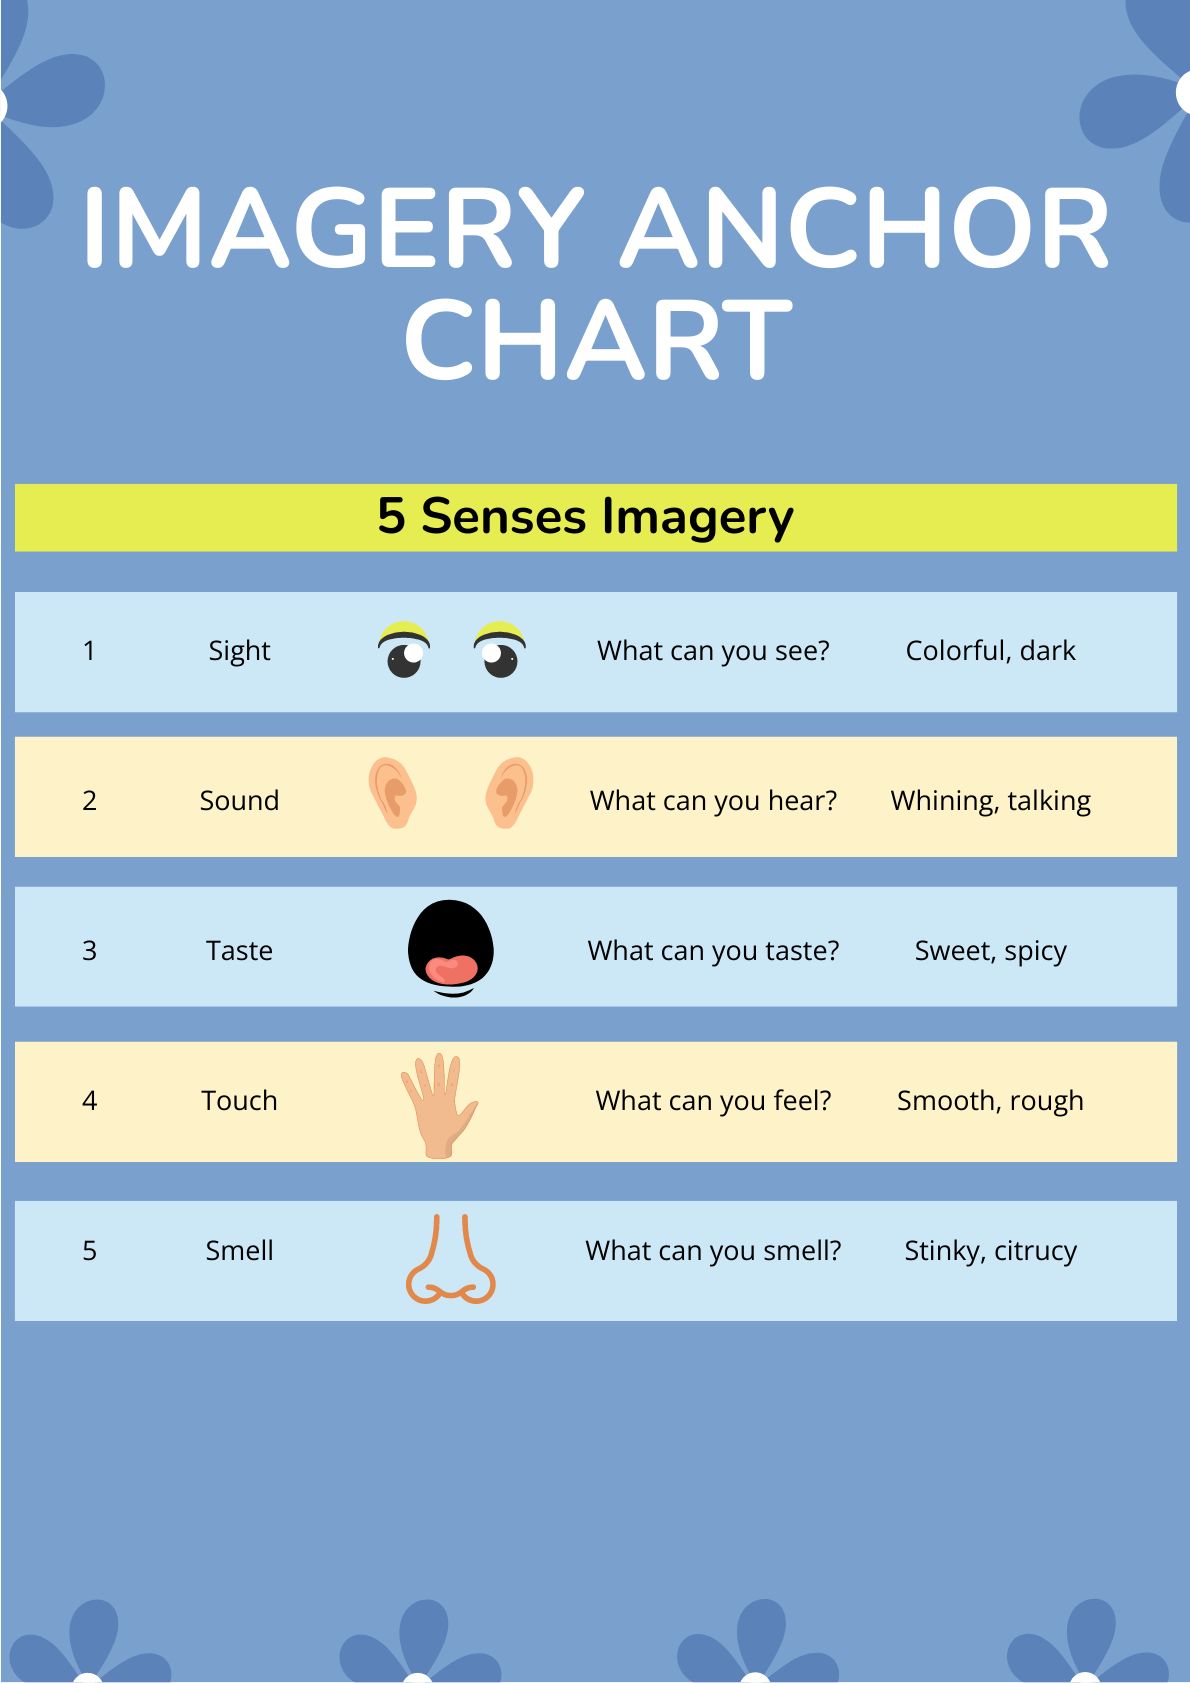 Imagery Anchor Chart in PDF, Illustrator